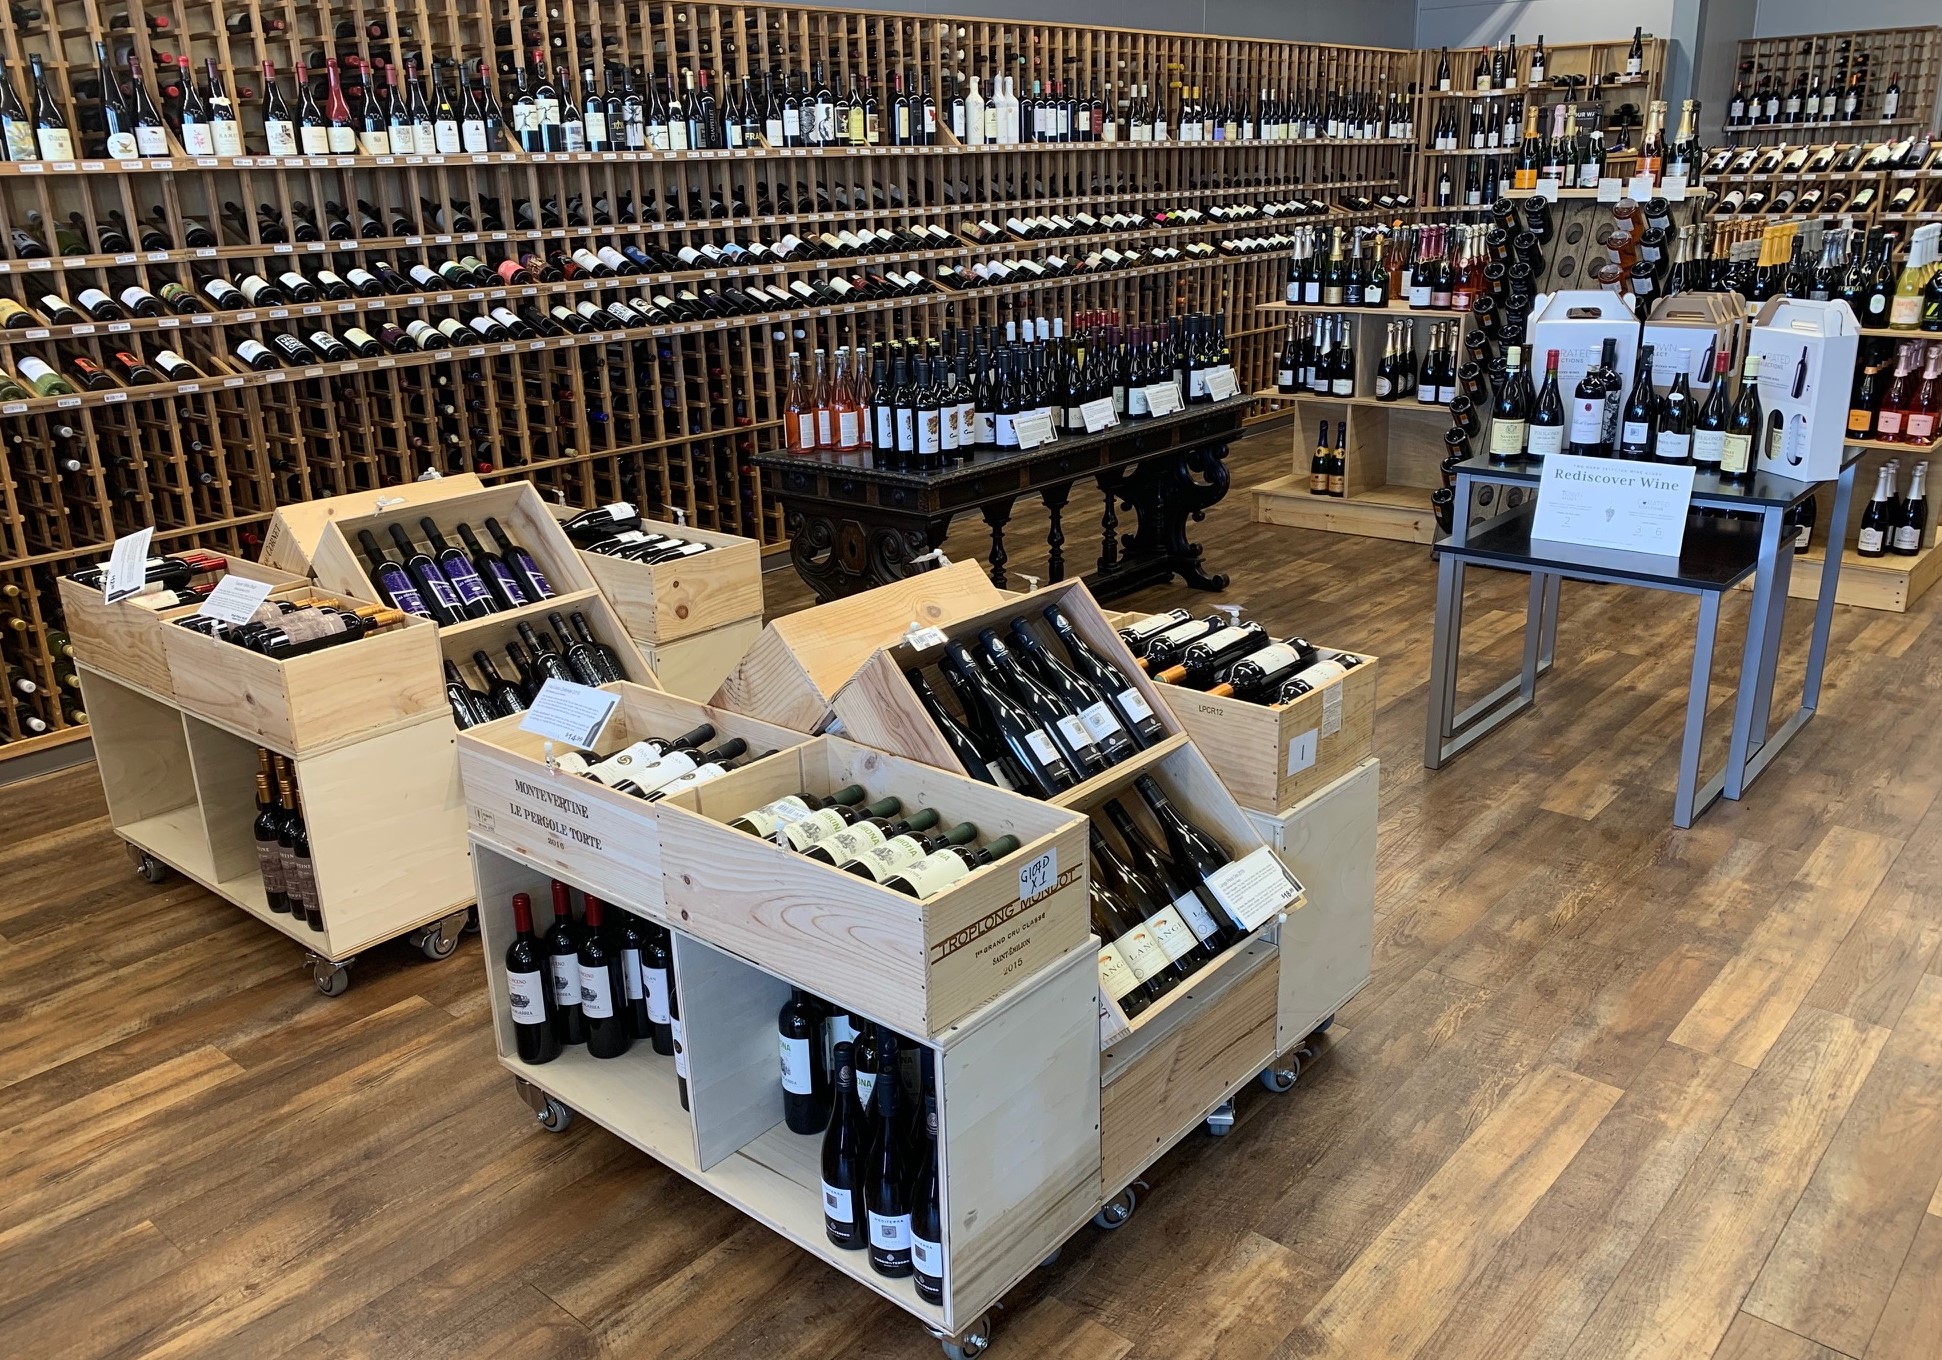 Town Wine and Spirits